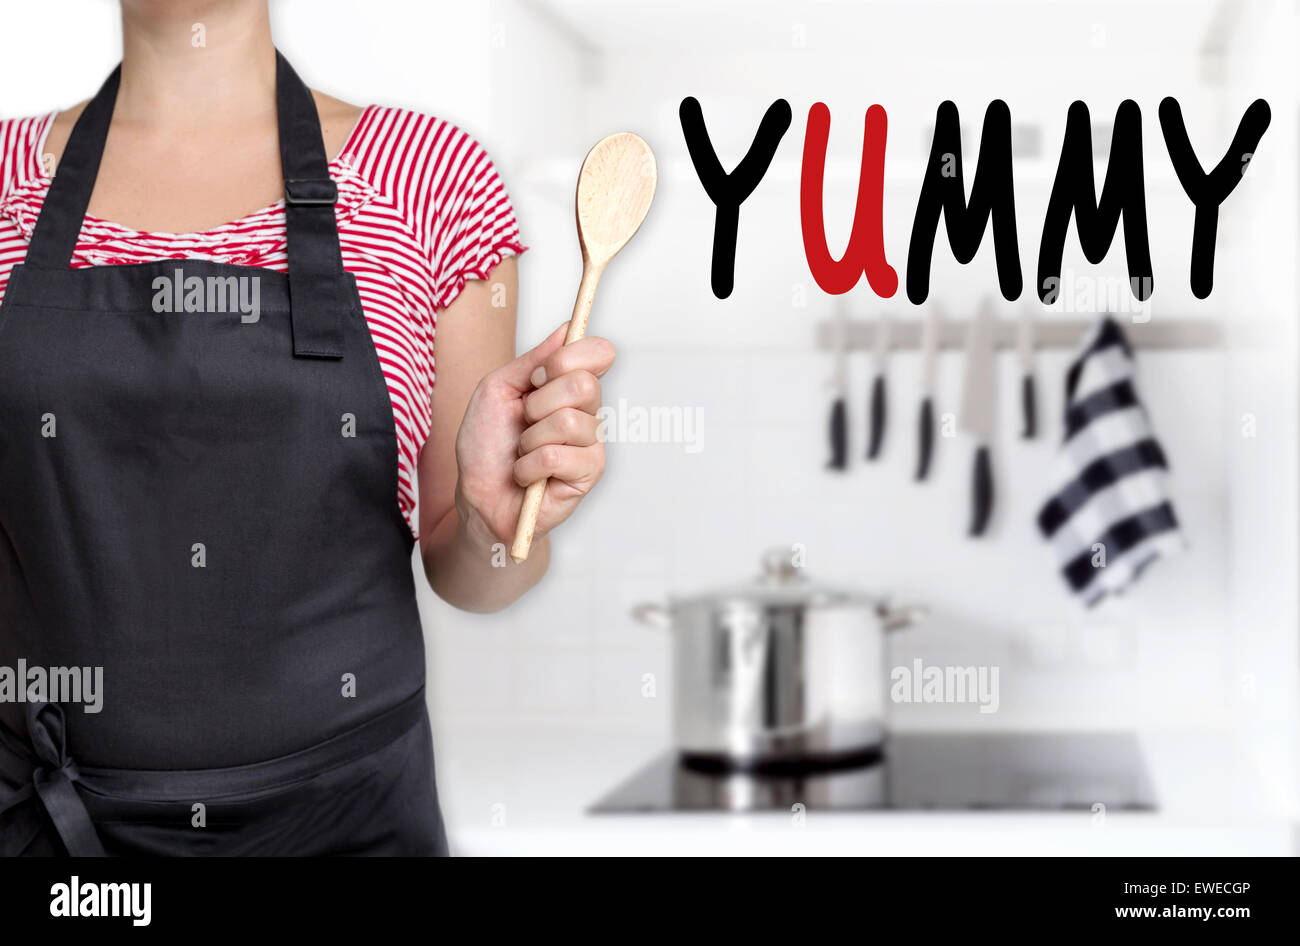 yummy cook holding wooden spoon background. Stock Photo